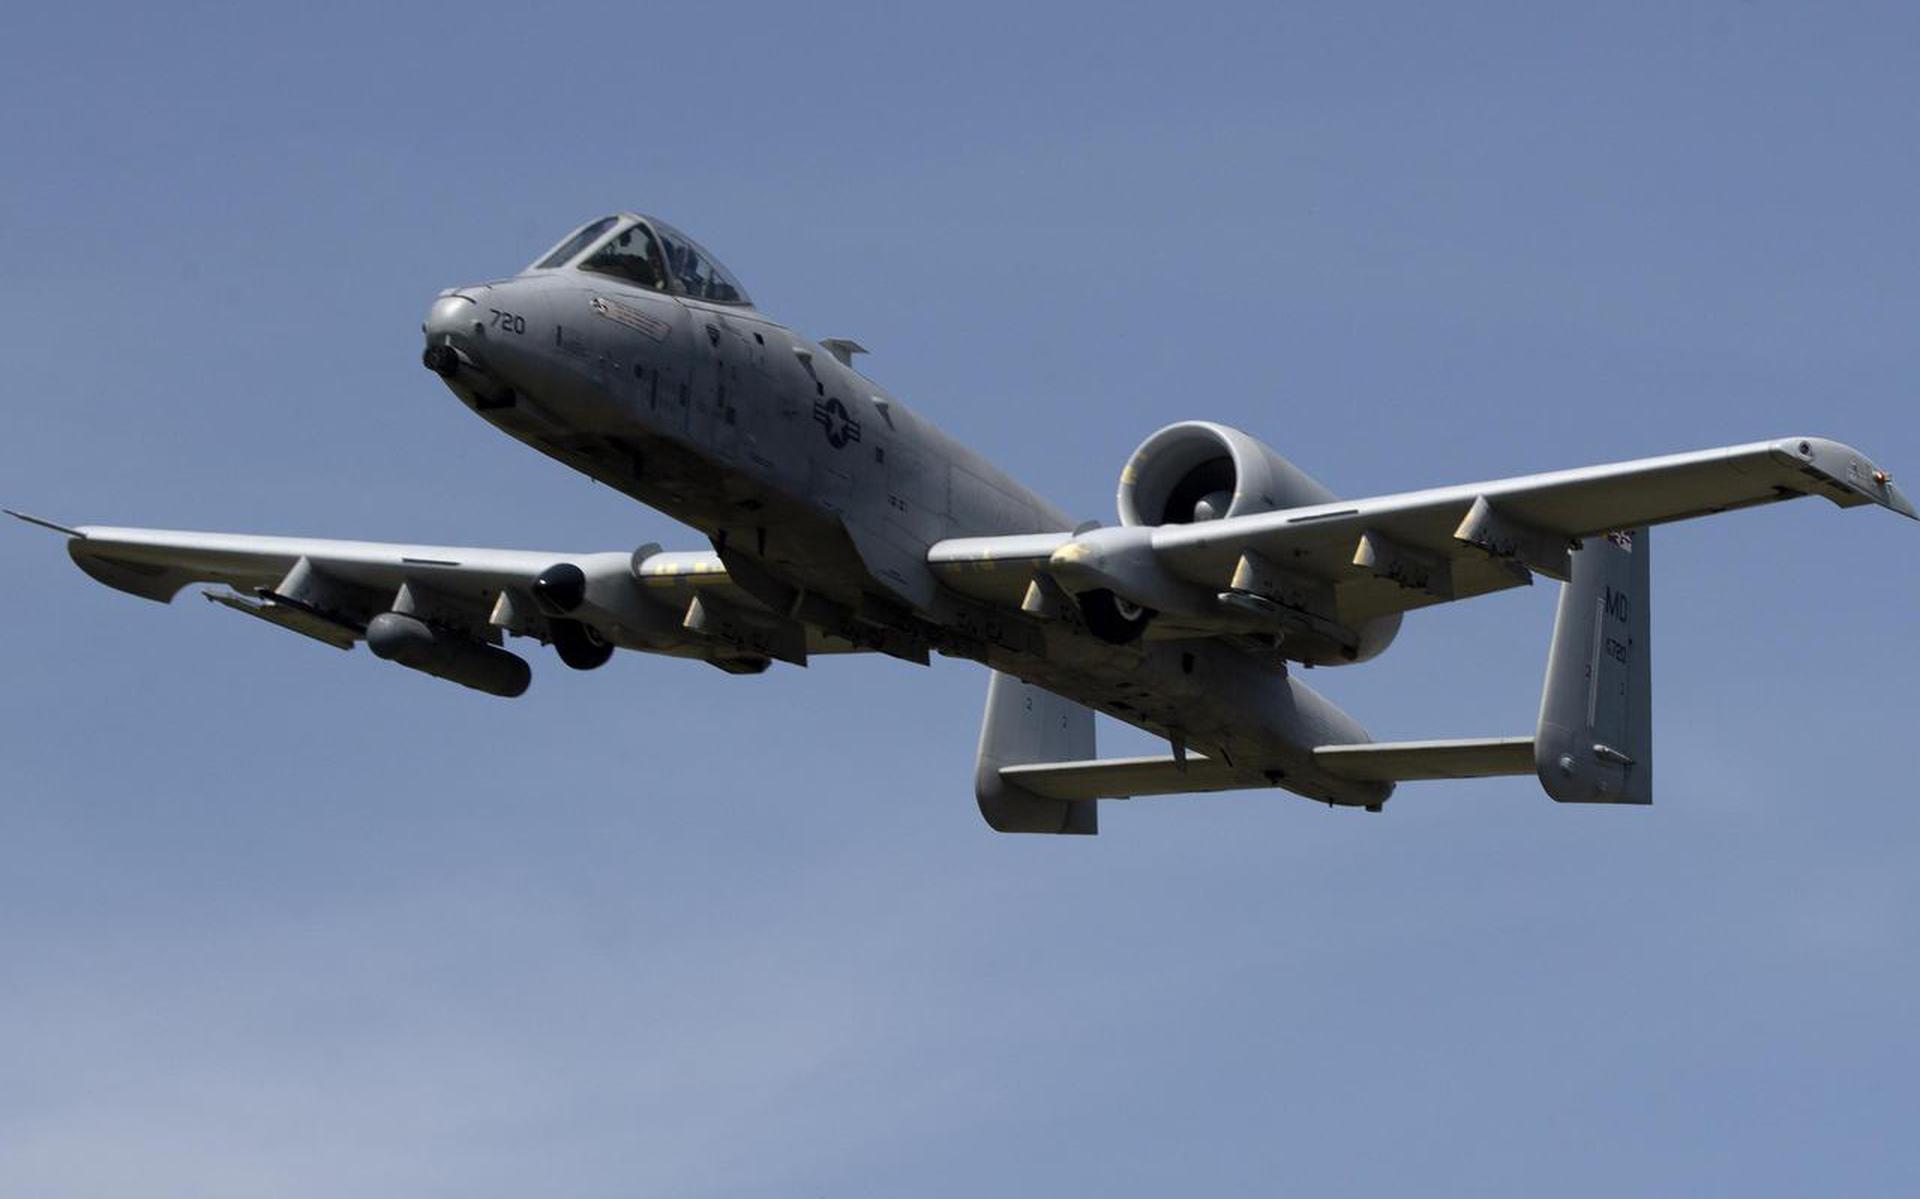 epa09942196 NATO forces' A-10 Thunderbolt plane flies by during the NATO exercise 'Swift Respone 22' at the Krivolak Army Training Area, near Negotino, Republic of North Macedonia, 12 May 2022. NATO exercise 'Swift Respone 22' is part of the exercise 'DEFENDER EUROPE 22' at the Krivolak Army Training Area. Holder of combat power is the 16th Air Assault Brigade UK along with the US Army and members of Italian army.  EPA/GEORGI LICOVSKI